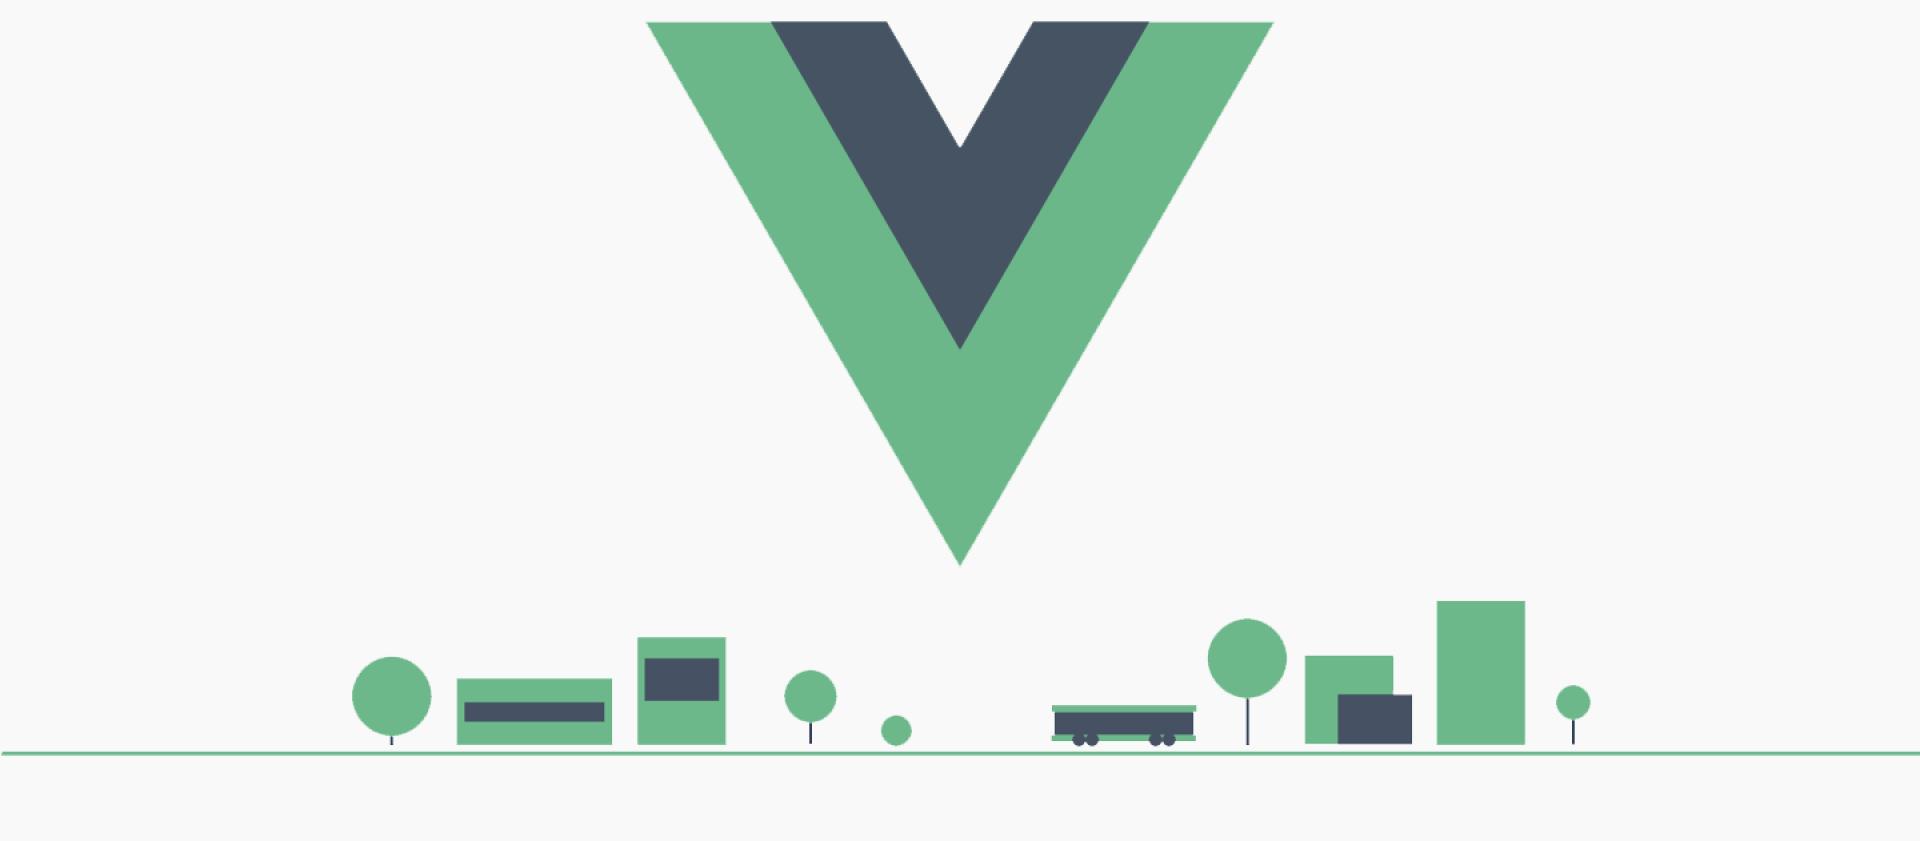 Why and how to create an Event Bus in Vuejs 3